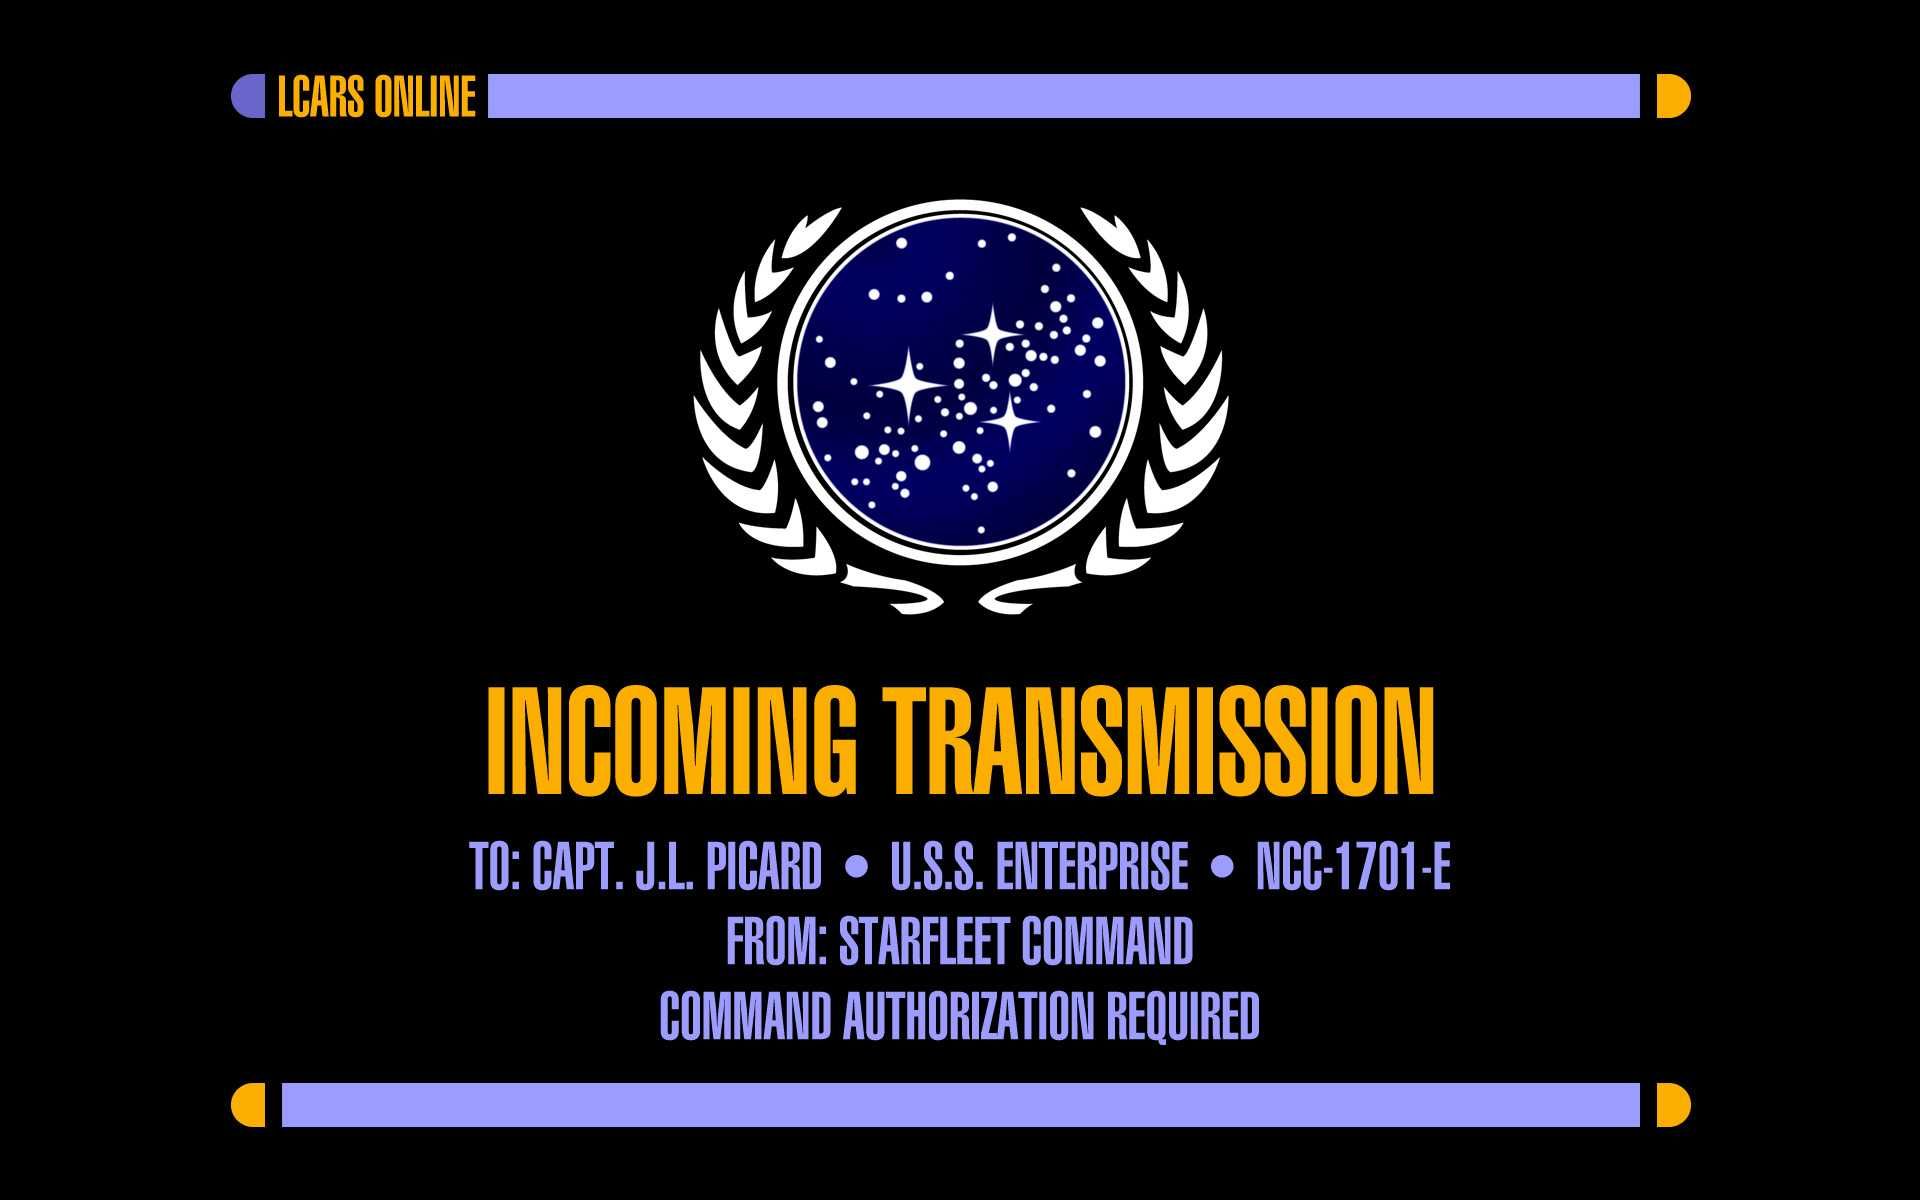 Star Trek Ining Transmission Lcars Links To Site With Lots Of